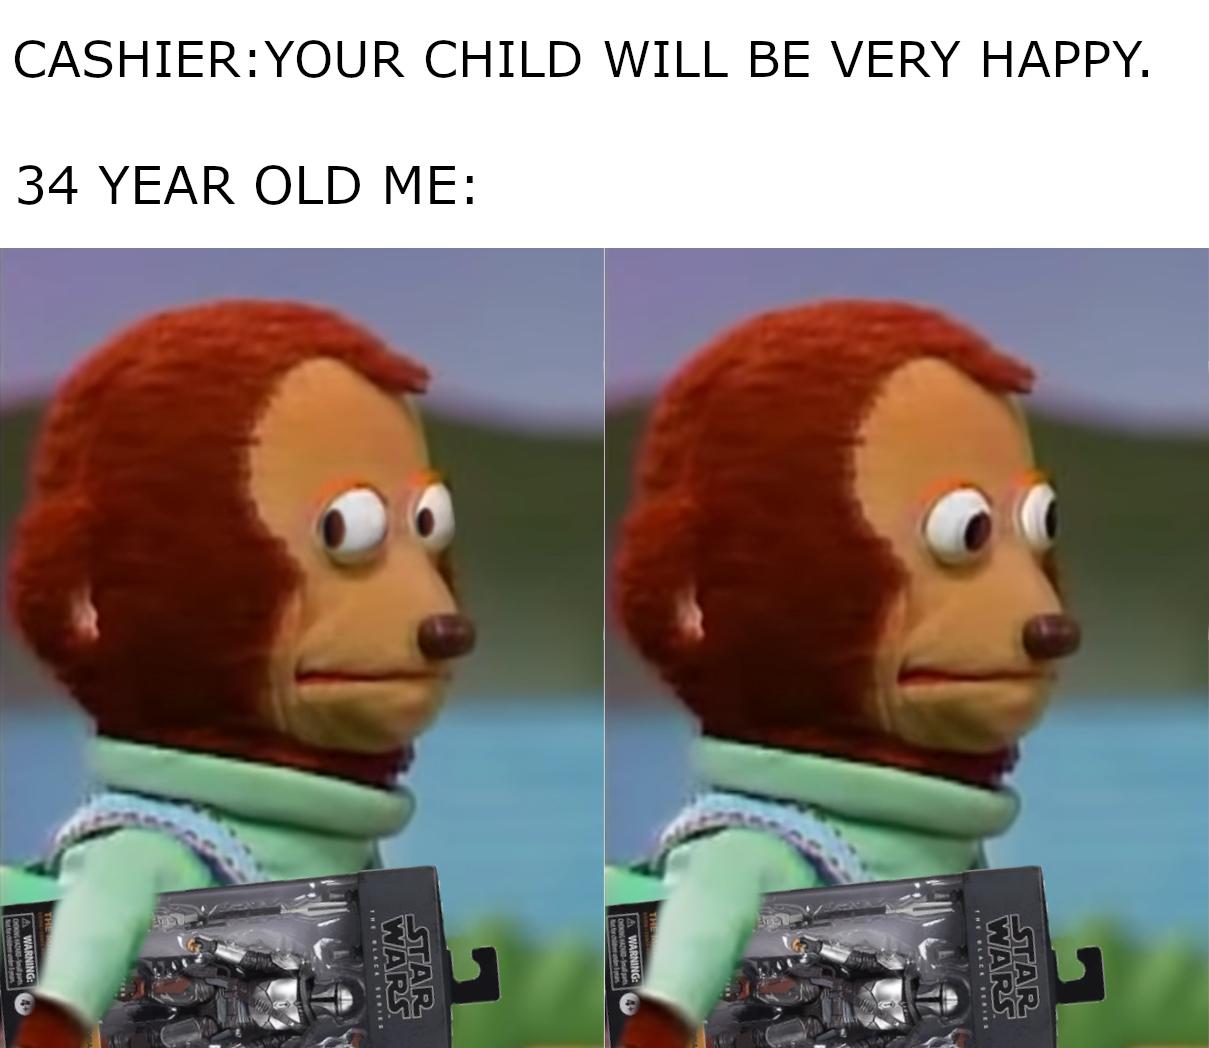 dank memes - handmaid's tale meme - Cashier Your Child Will Be Very Happy. 34 Year Old Me Warning The Blace Serie Wars Star War... Star